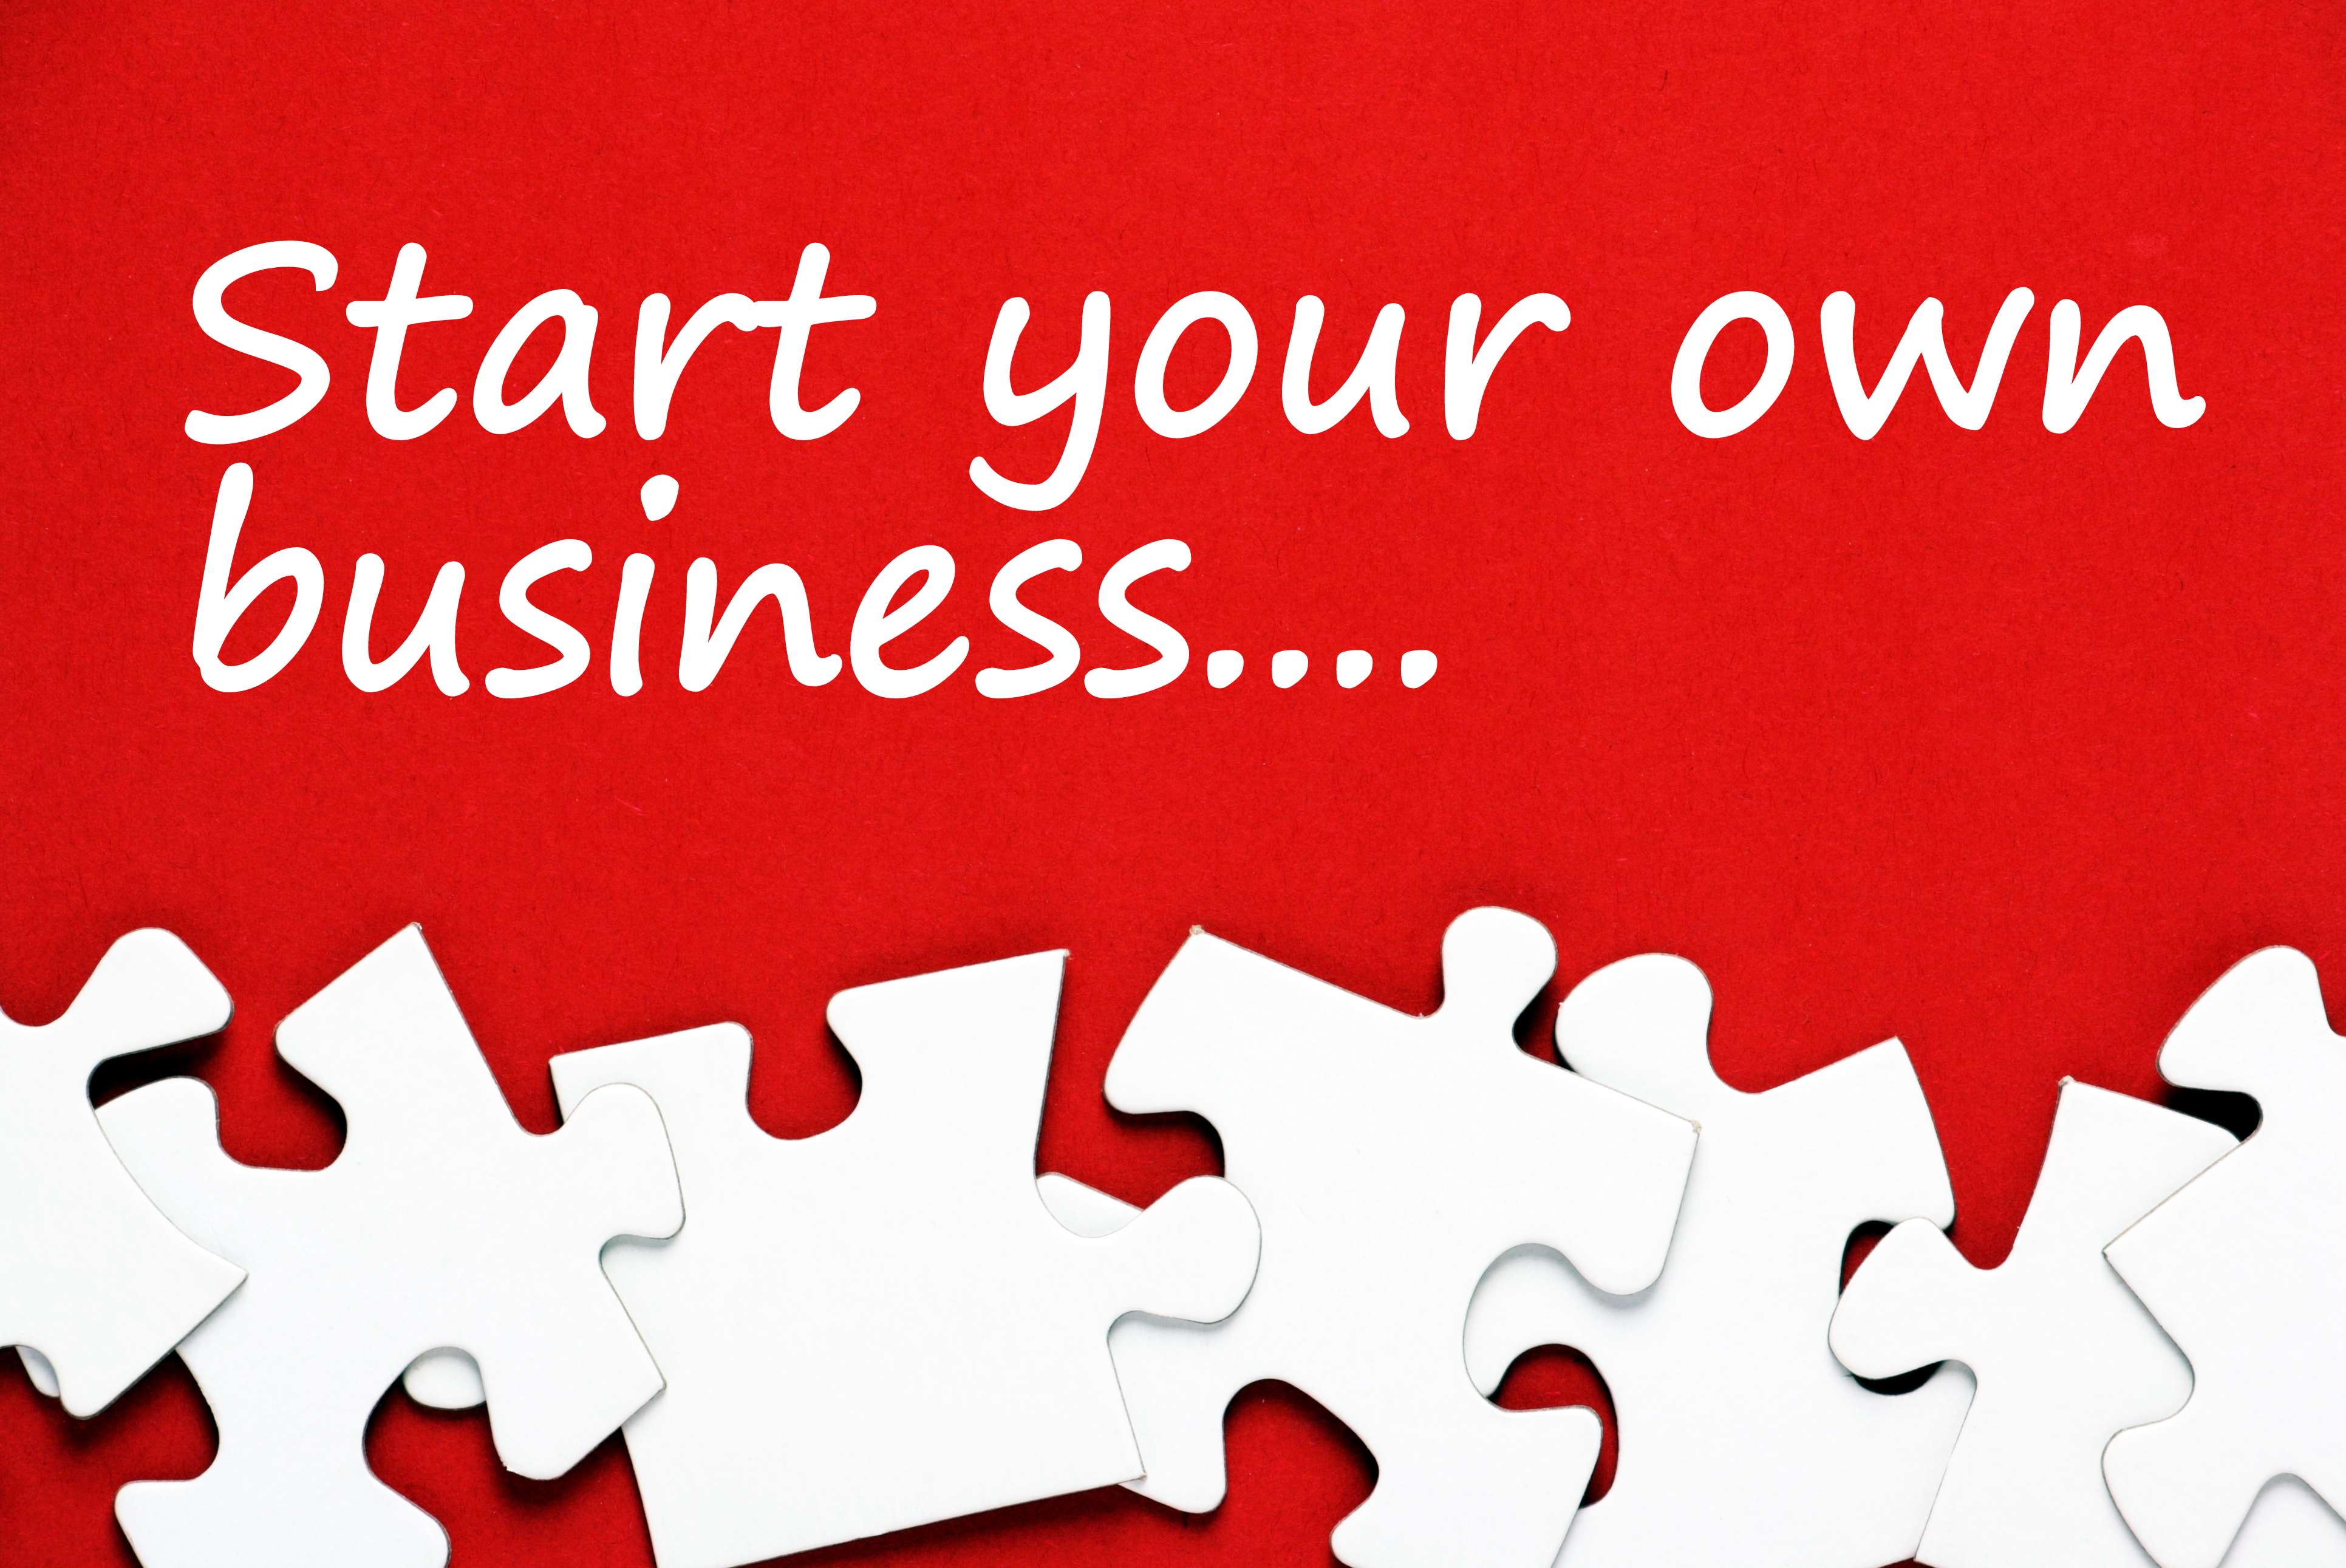 My own business. Start your own Business. How to start your own Business. Предложение с start your own Business. How to start my own Business.